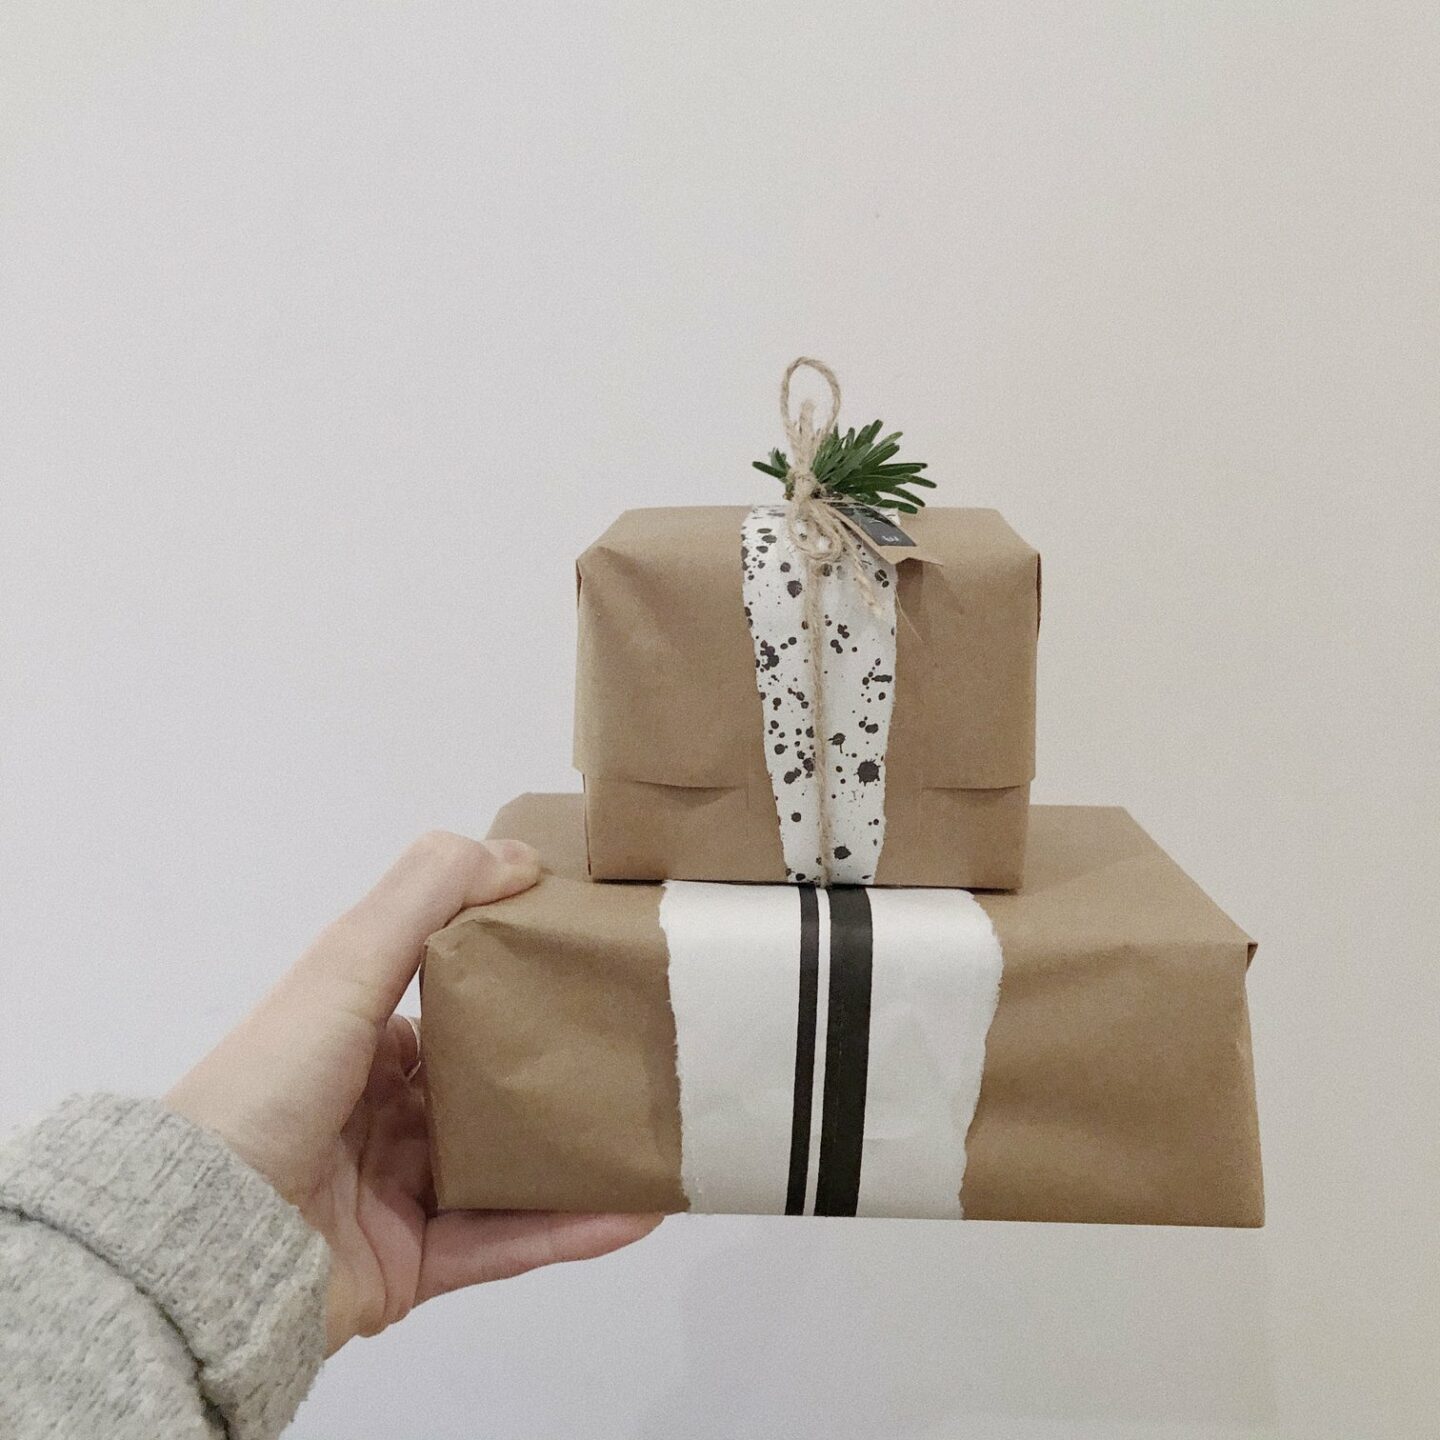 Hand holding a stack of sustainably wrapped brown paper presents